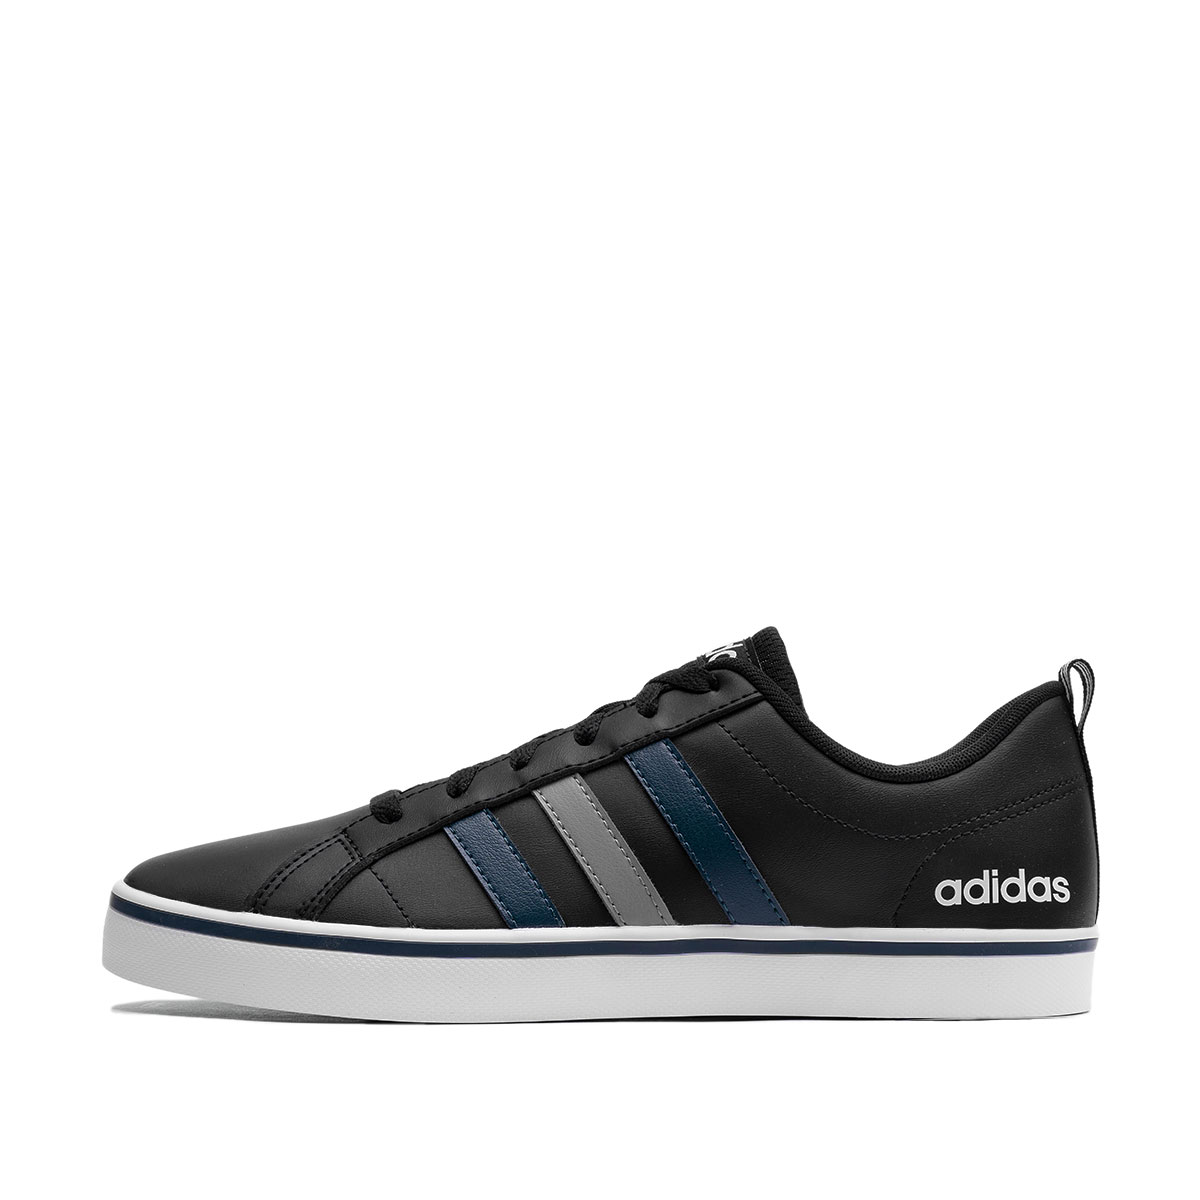 adidas VS Pace  FY8559